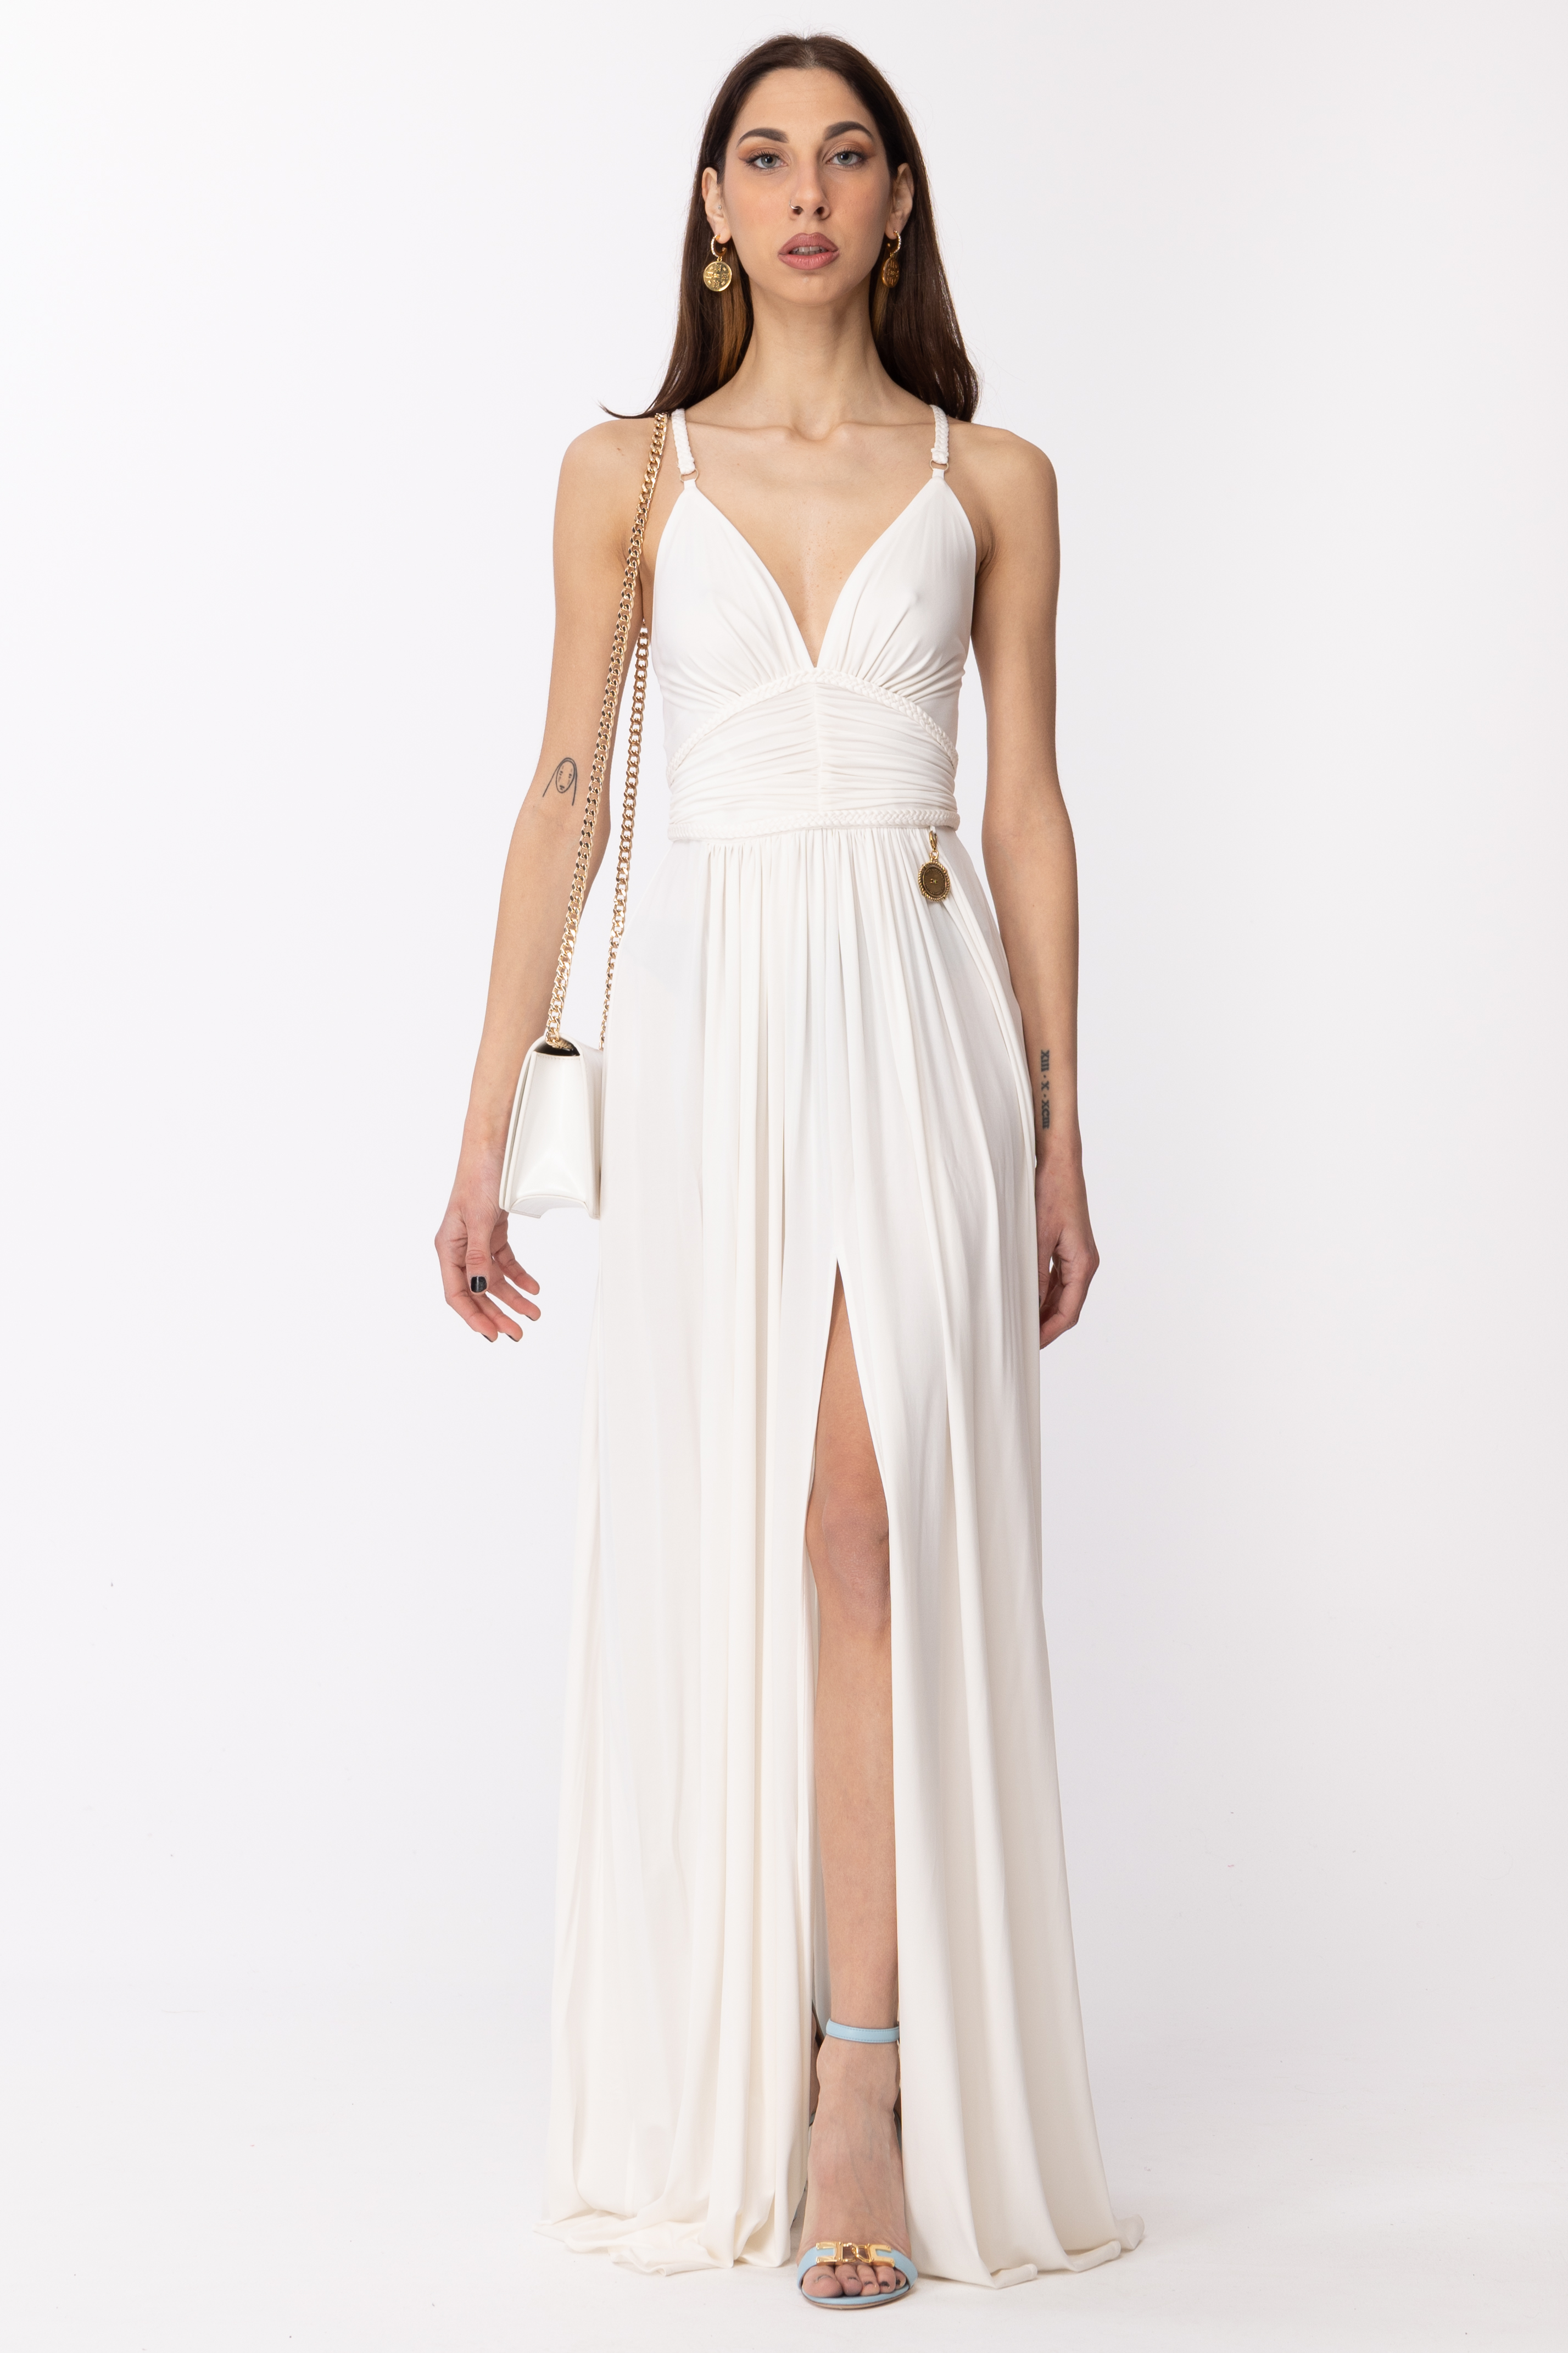 Preview: Elisabetta Franchi Red Carpet dress with woven straps Avorio